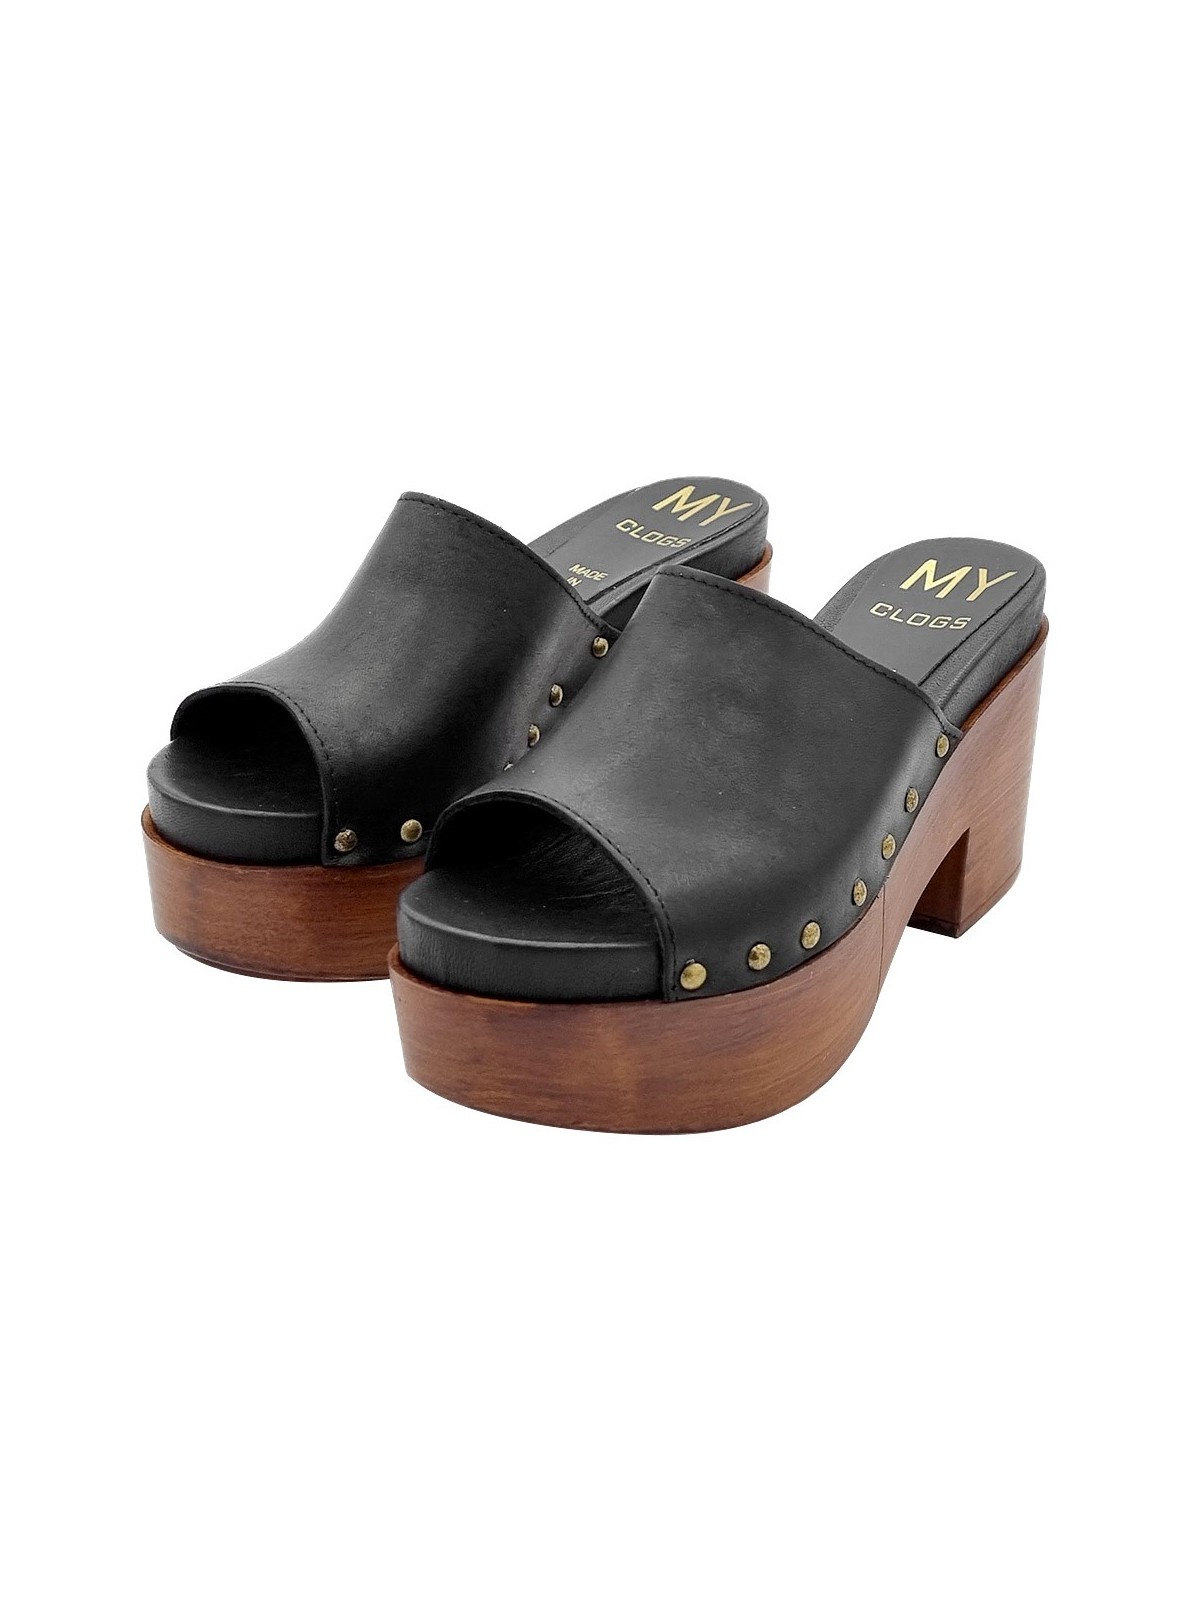 HIGH BLACK LEATHER CLOGS WITH COMFORTABLE HEEL